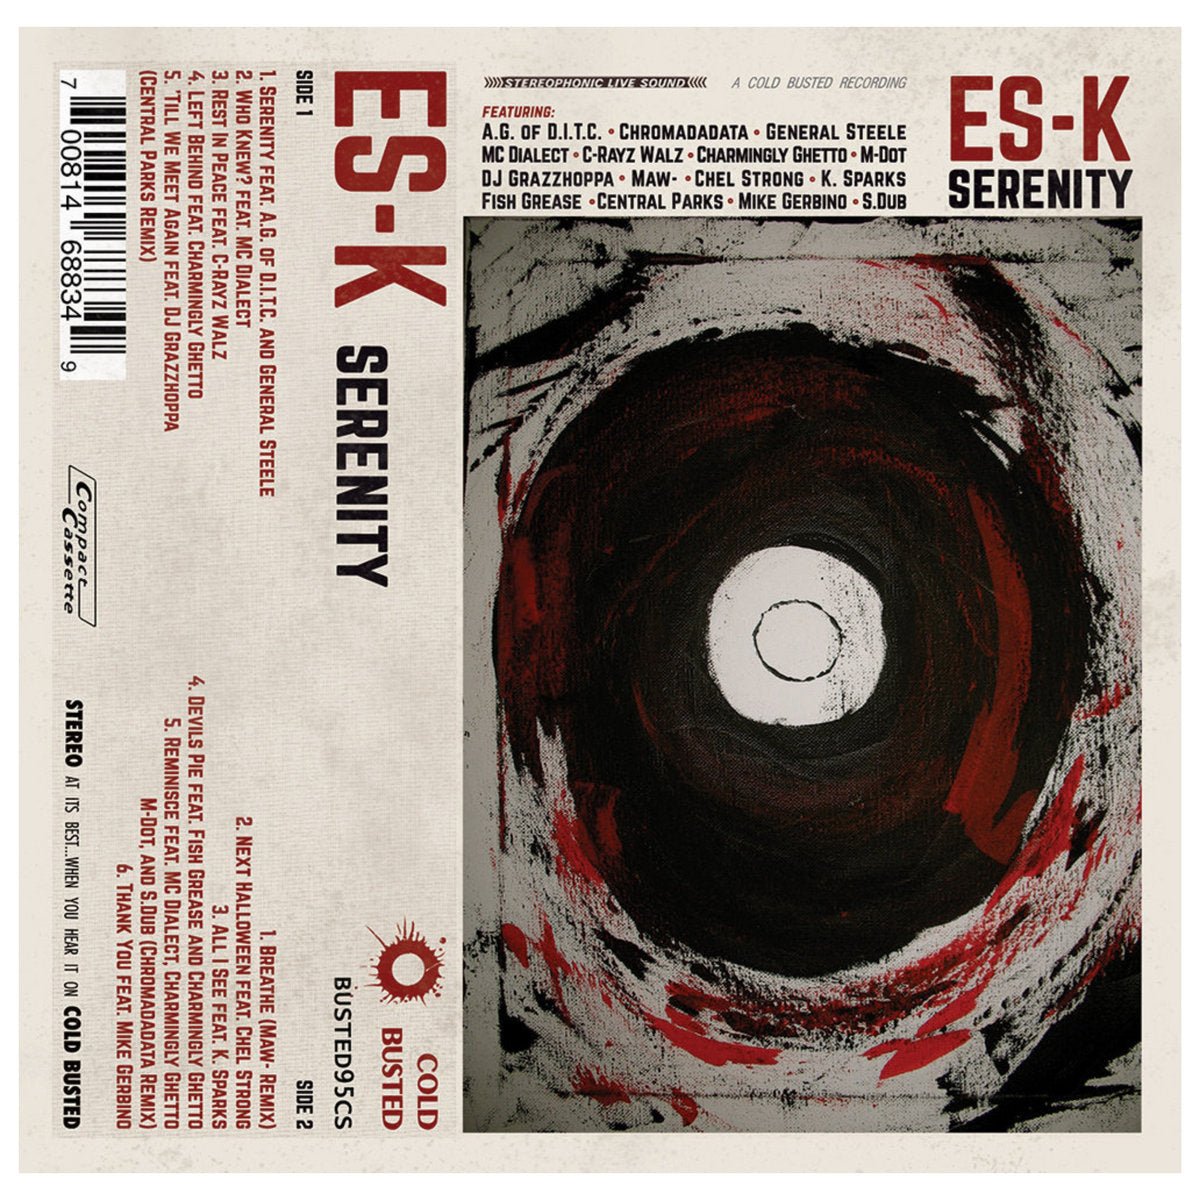 Es-K - Serenity - Limited Edition Cassette Tape - Cold Busted